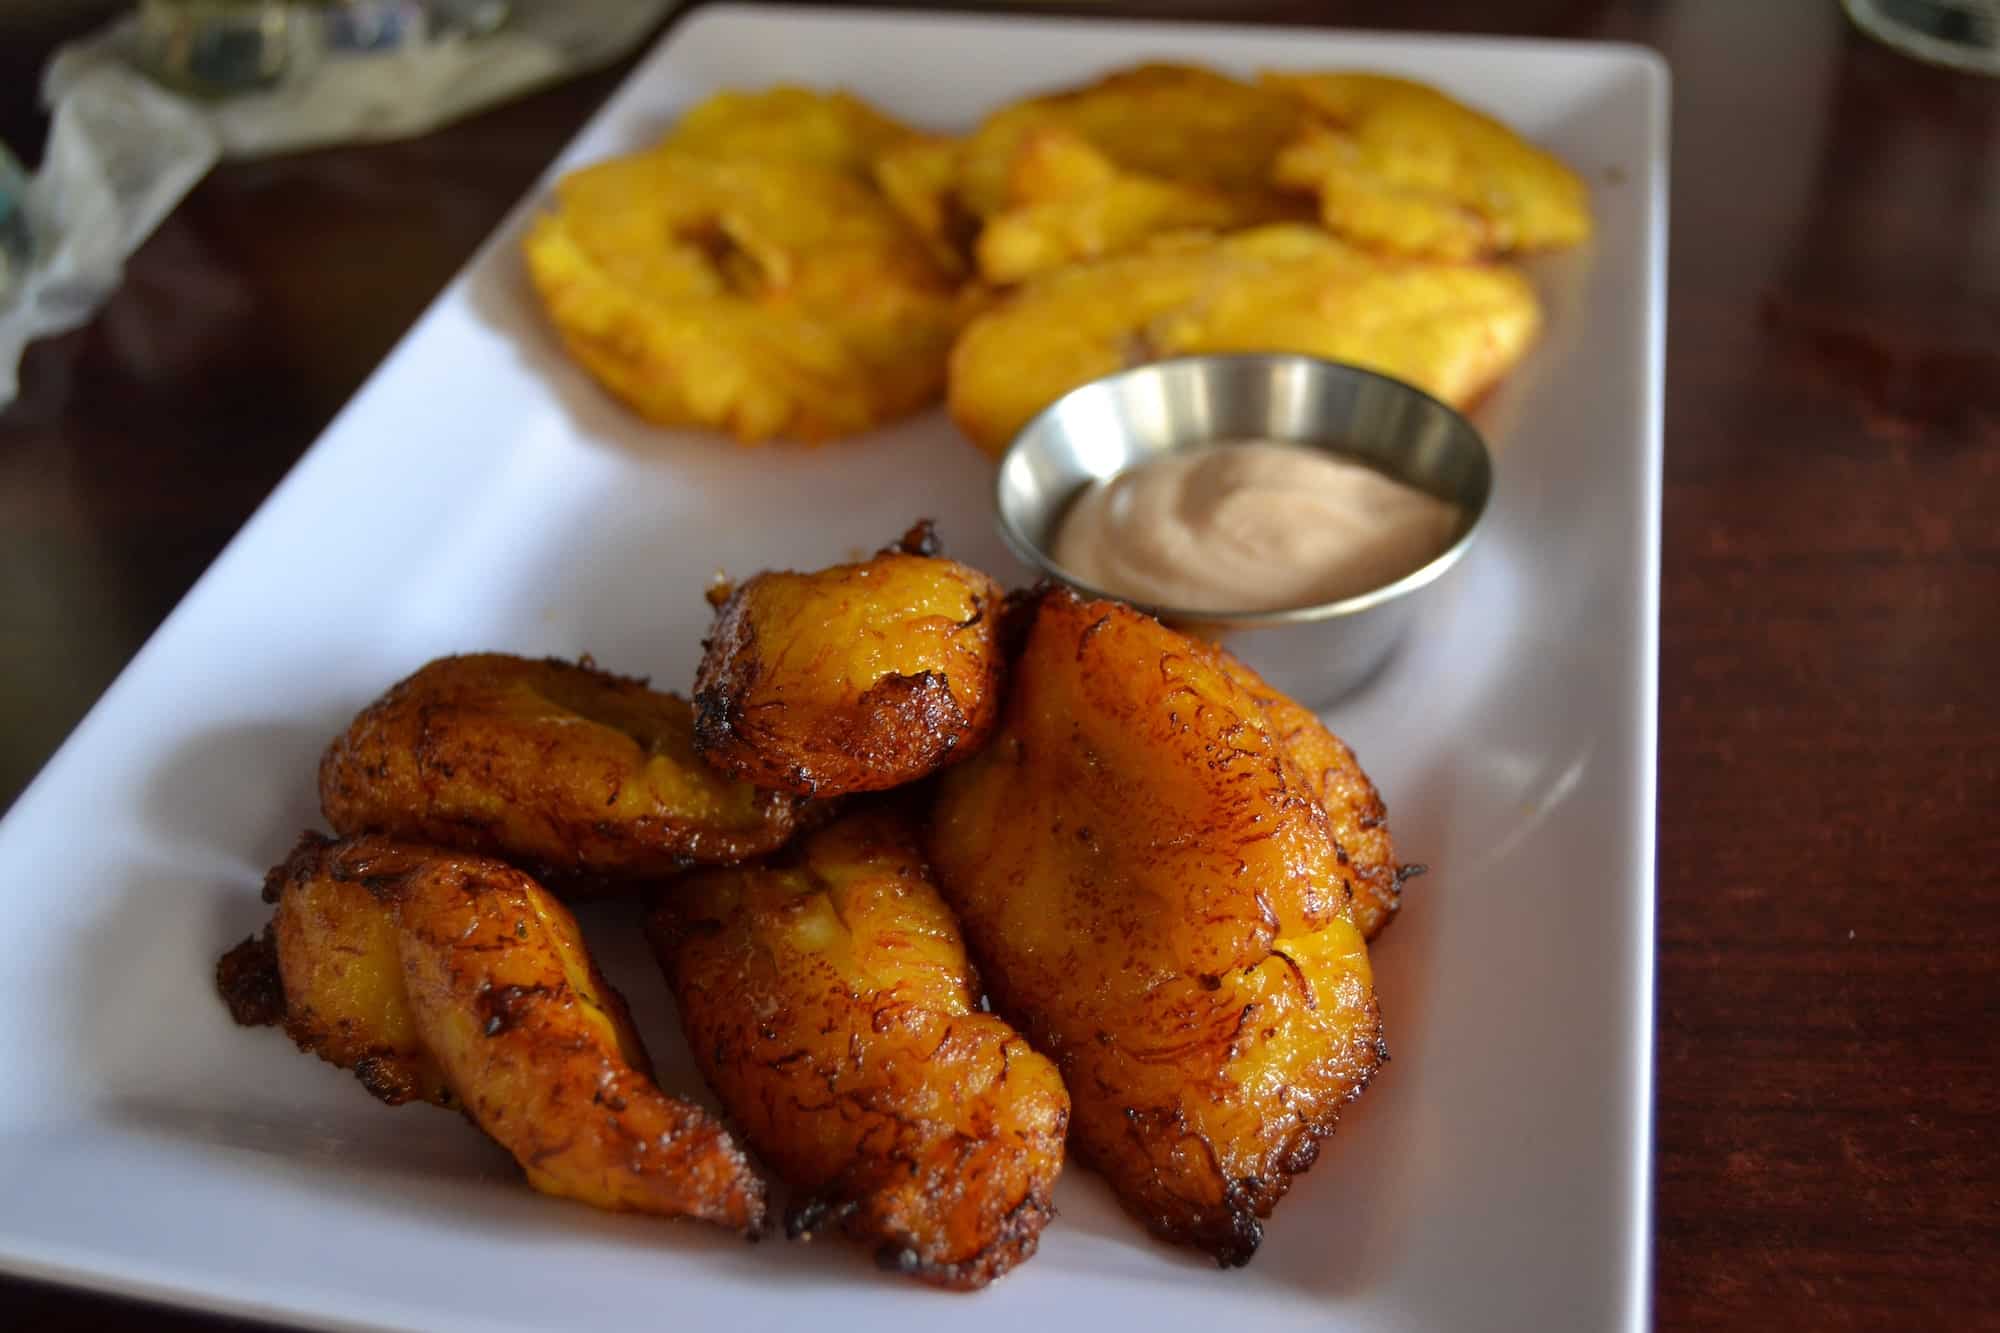 Dodo - made from plantains